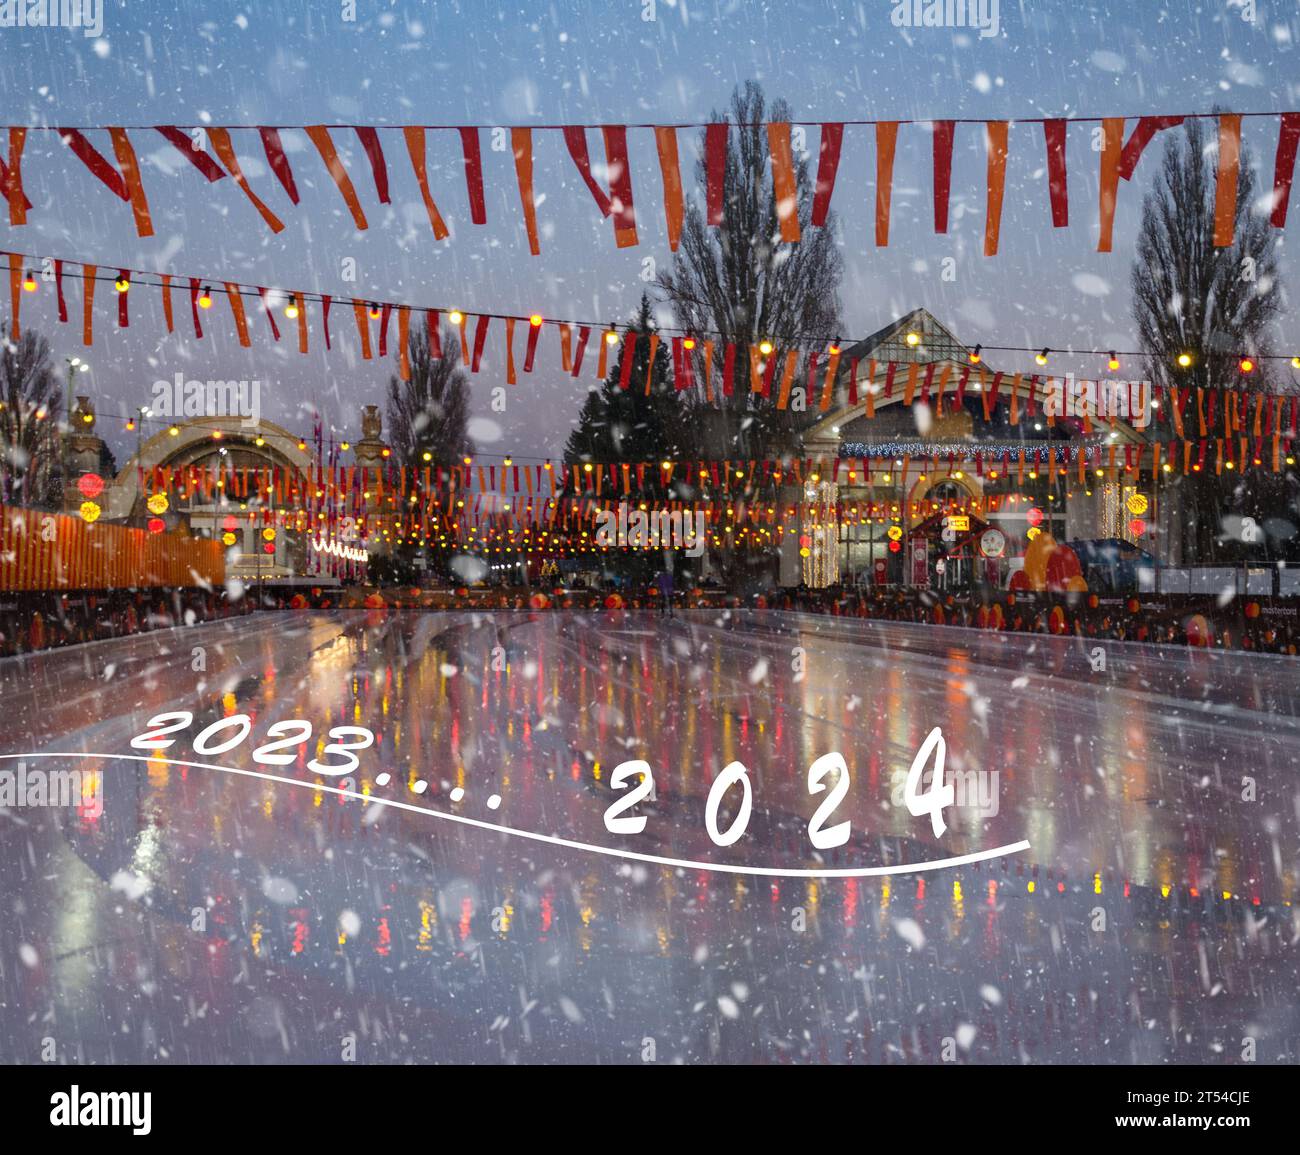 The inscription 2023-2024 on the skating rink decorated with bright flags, on a snowy evening. Stock Photo